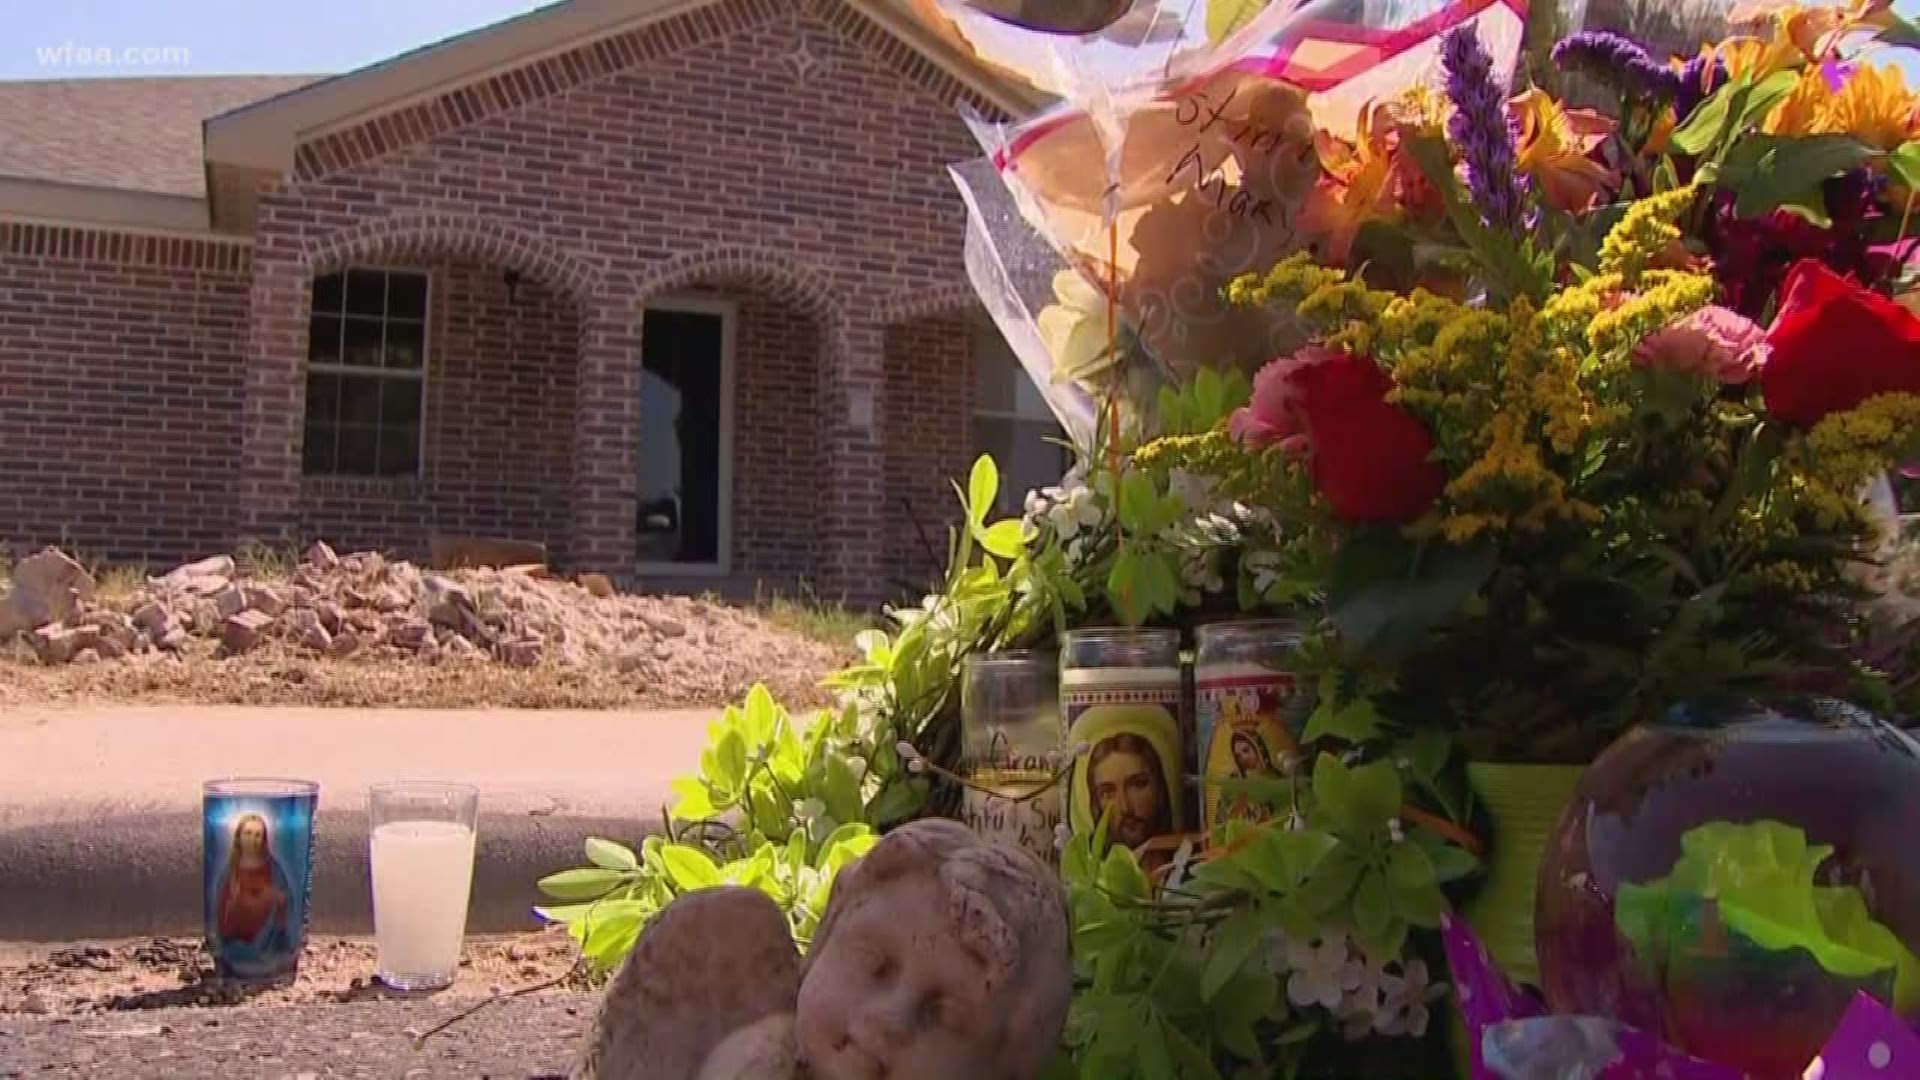 "I try to be strong." Some neighbors say returning to a routine is tough, with memorials to victims serve as a daily reminder of Saturday's active shooting incident.